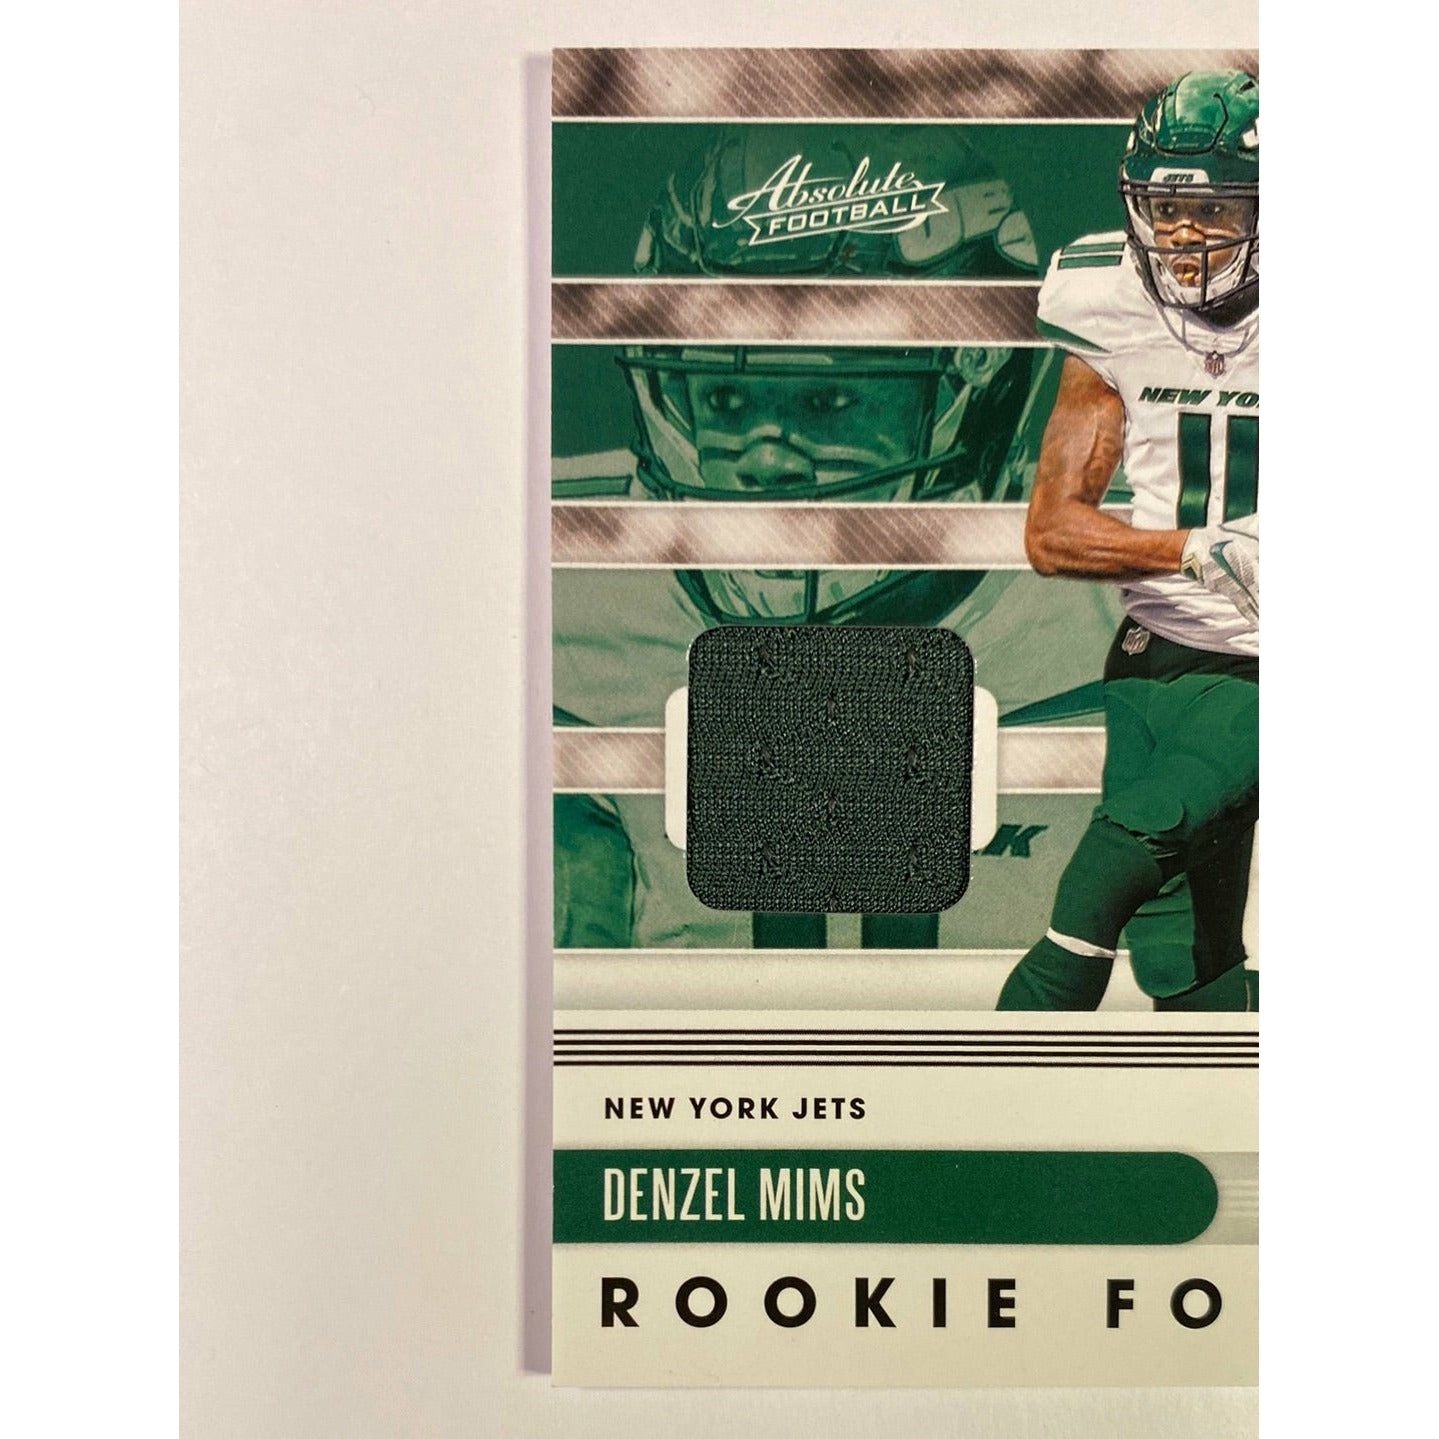 2020 Absolute Denzel Mims Rookie Force Jersey Patch